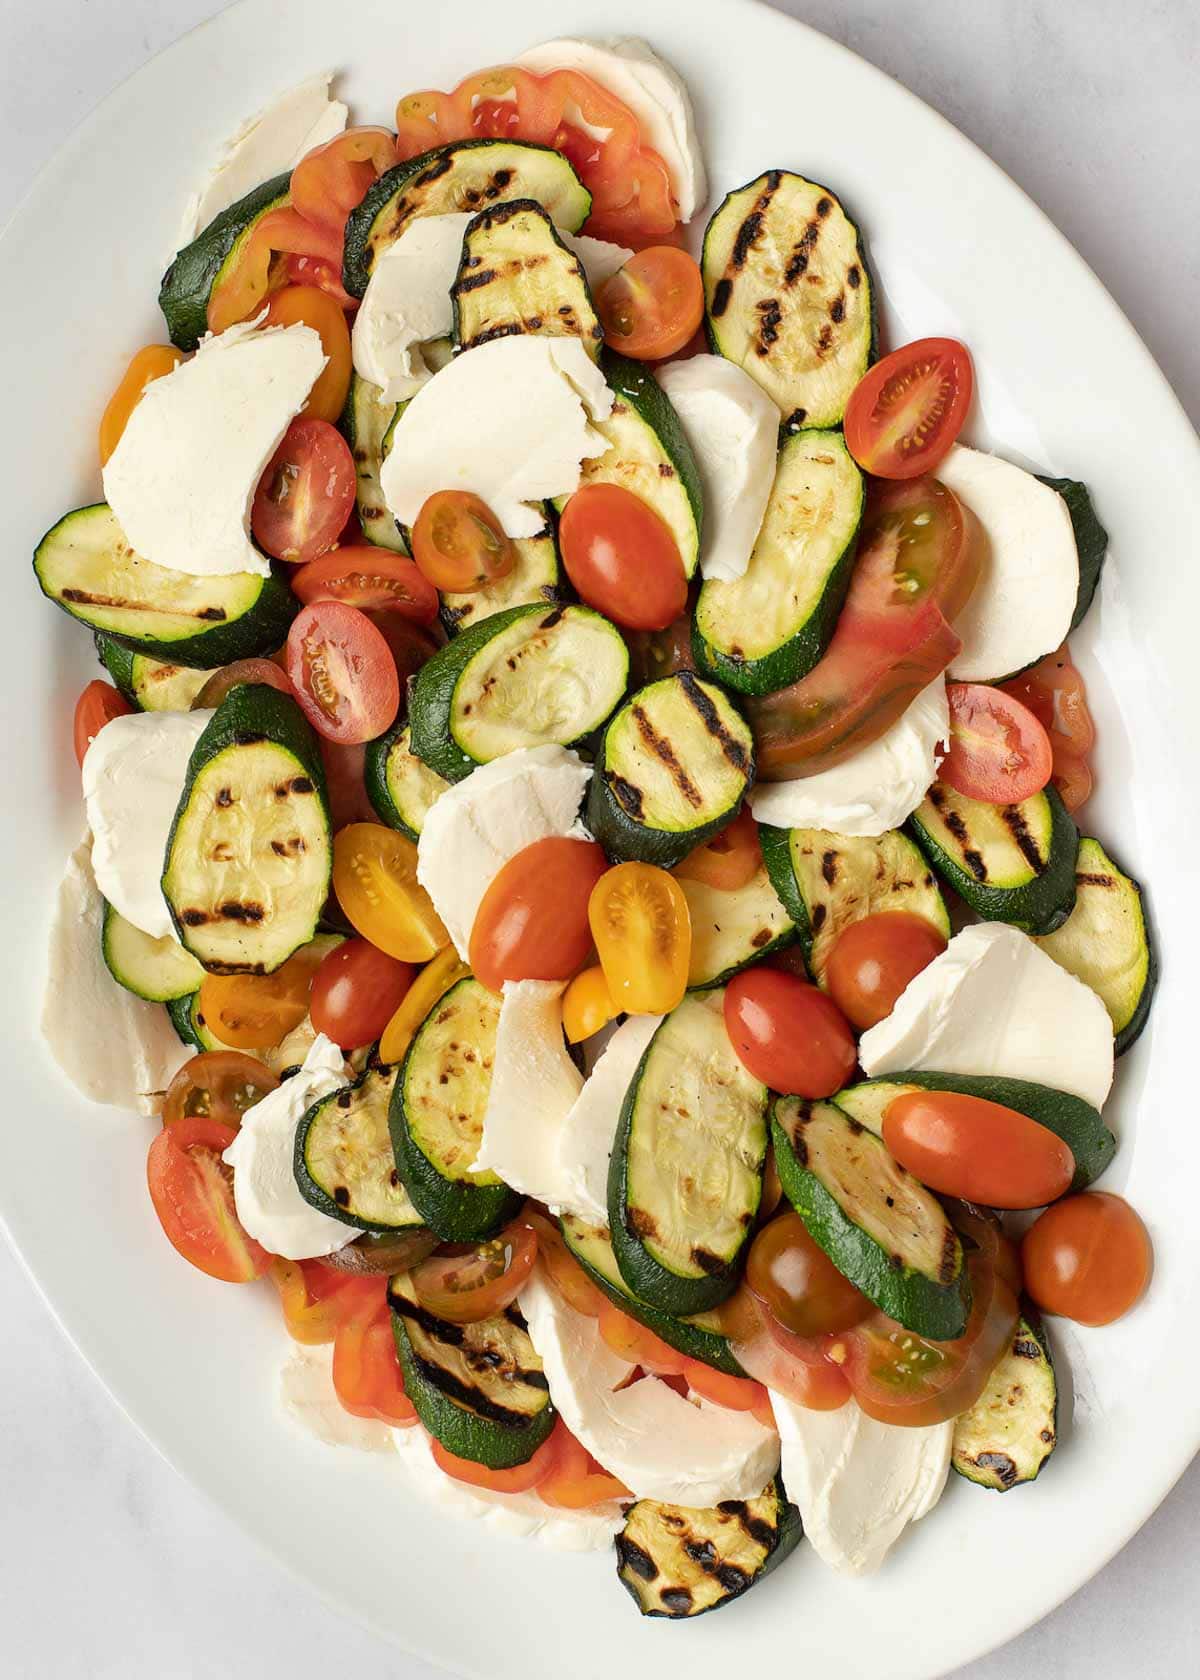 This Grilled Zucchini Salad with a homemade red wine vinaigrette will be your repeat meal of the summer! This healthy recipe is ready in under 30 minutes, loaded with fresh mozzarella and tender veggies, and has fewer than 5 net carbs.